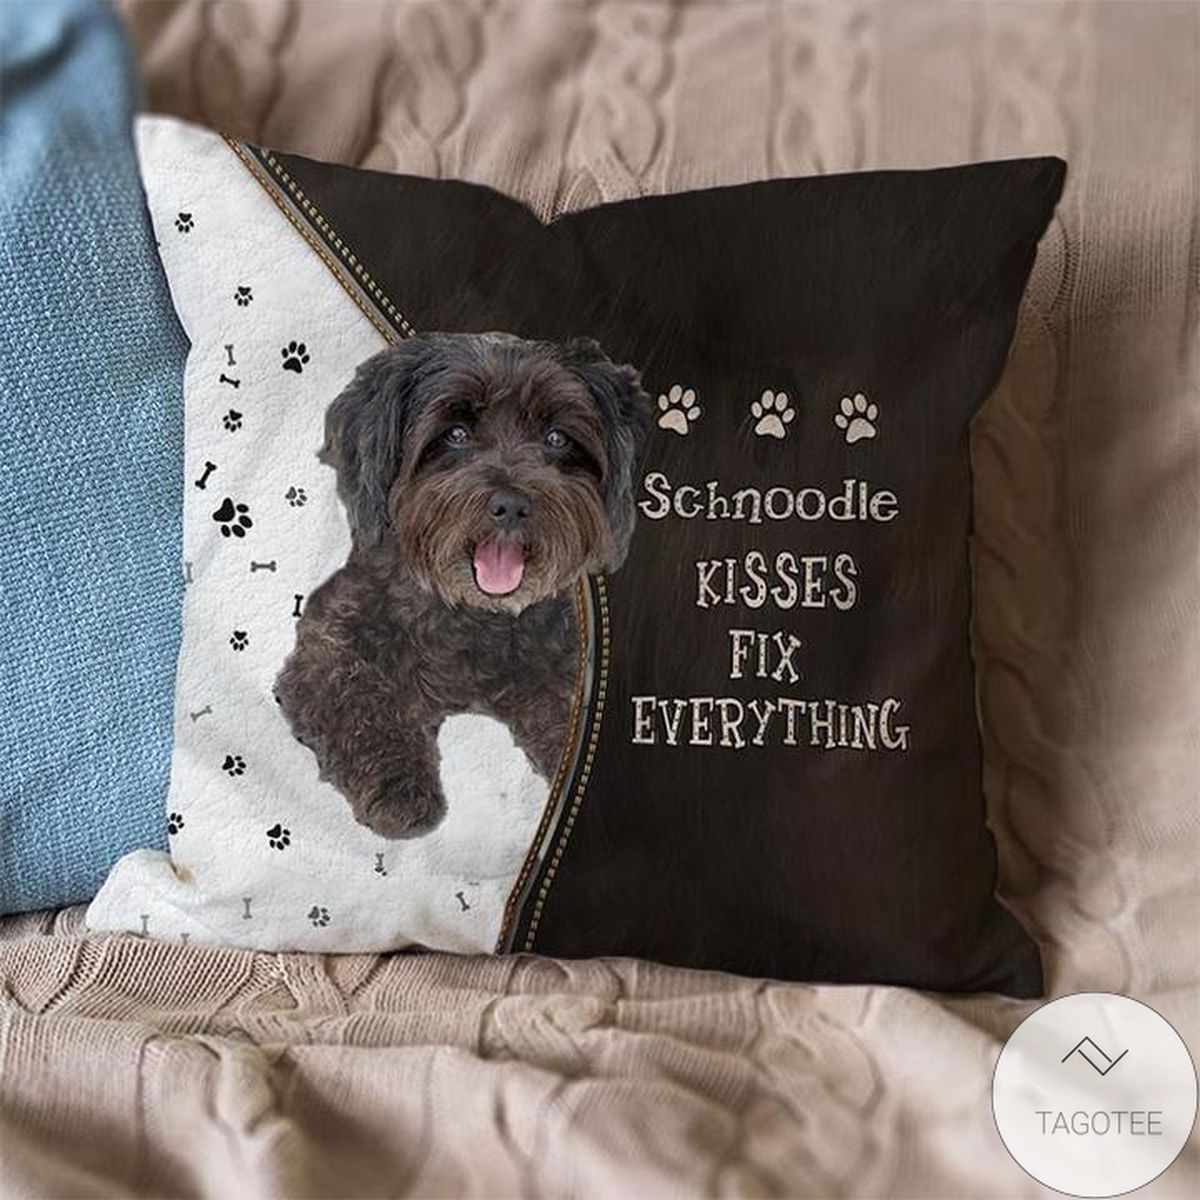 Schnoodle Kisses Fix Everything Pillowcase